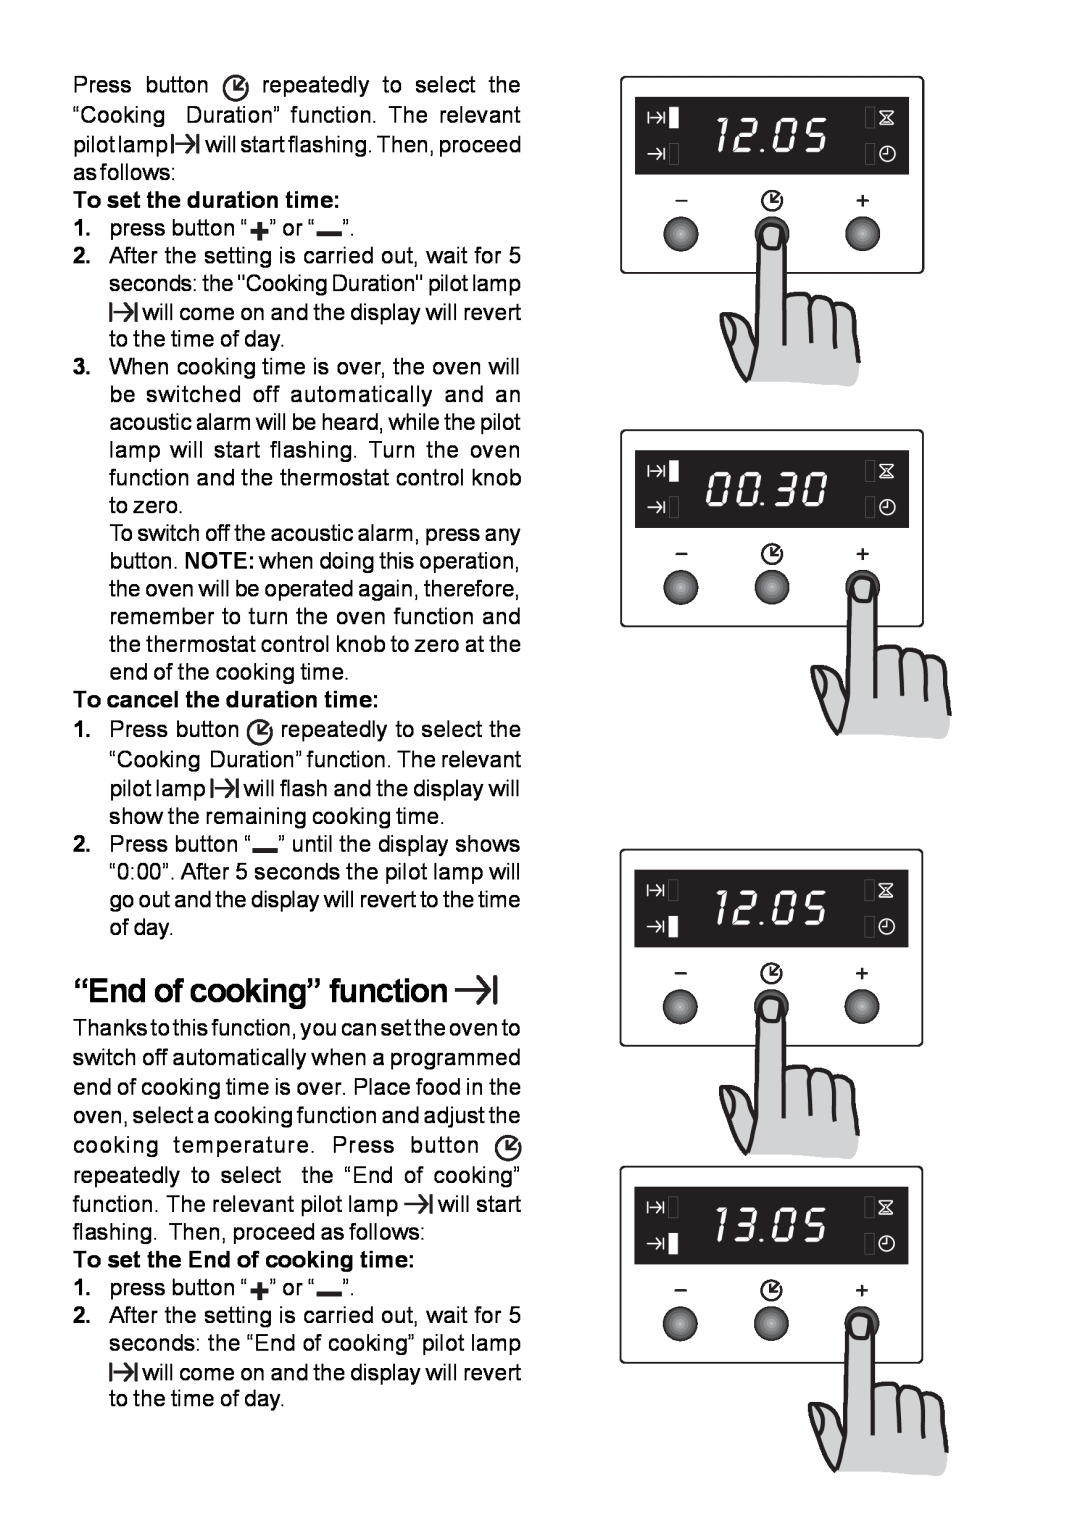 Moffat MSF 615 manual “End of cooking” function, To cancel the duration time, To set the End of cooking time 